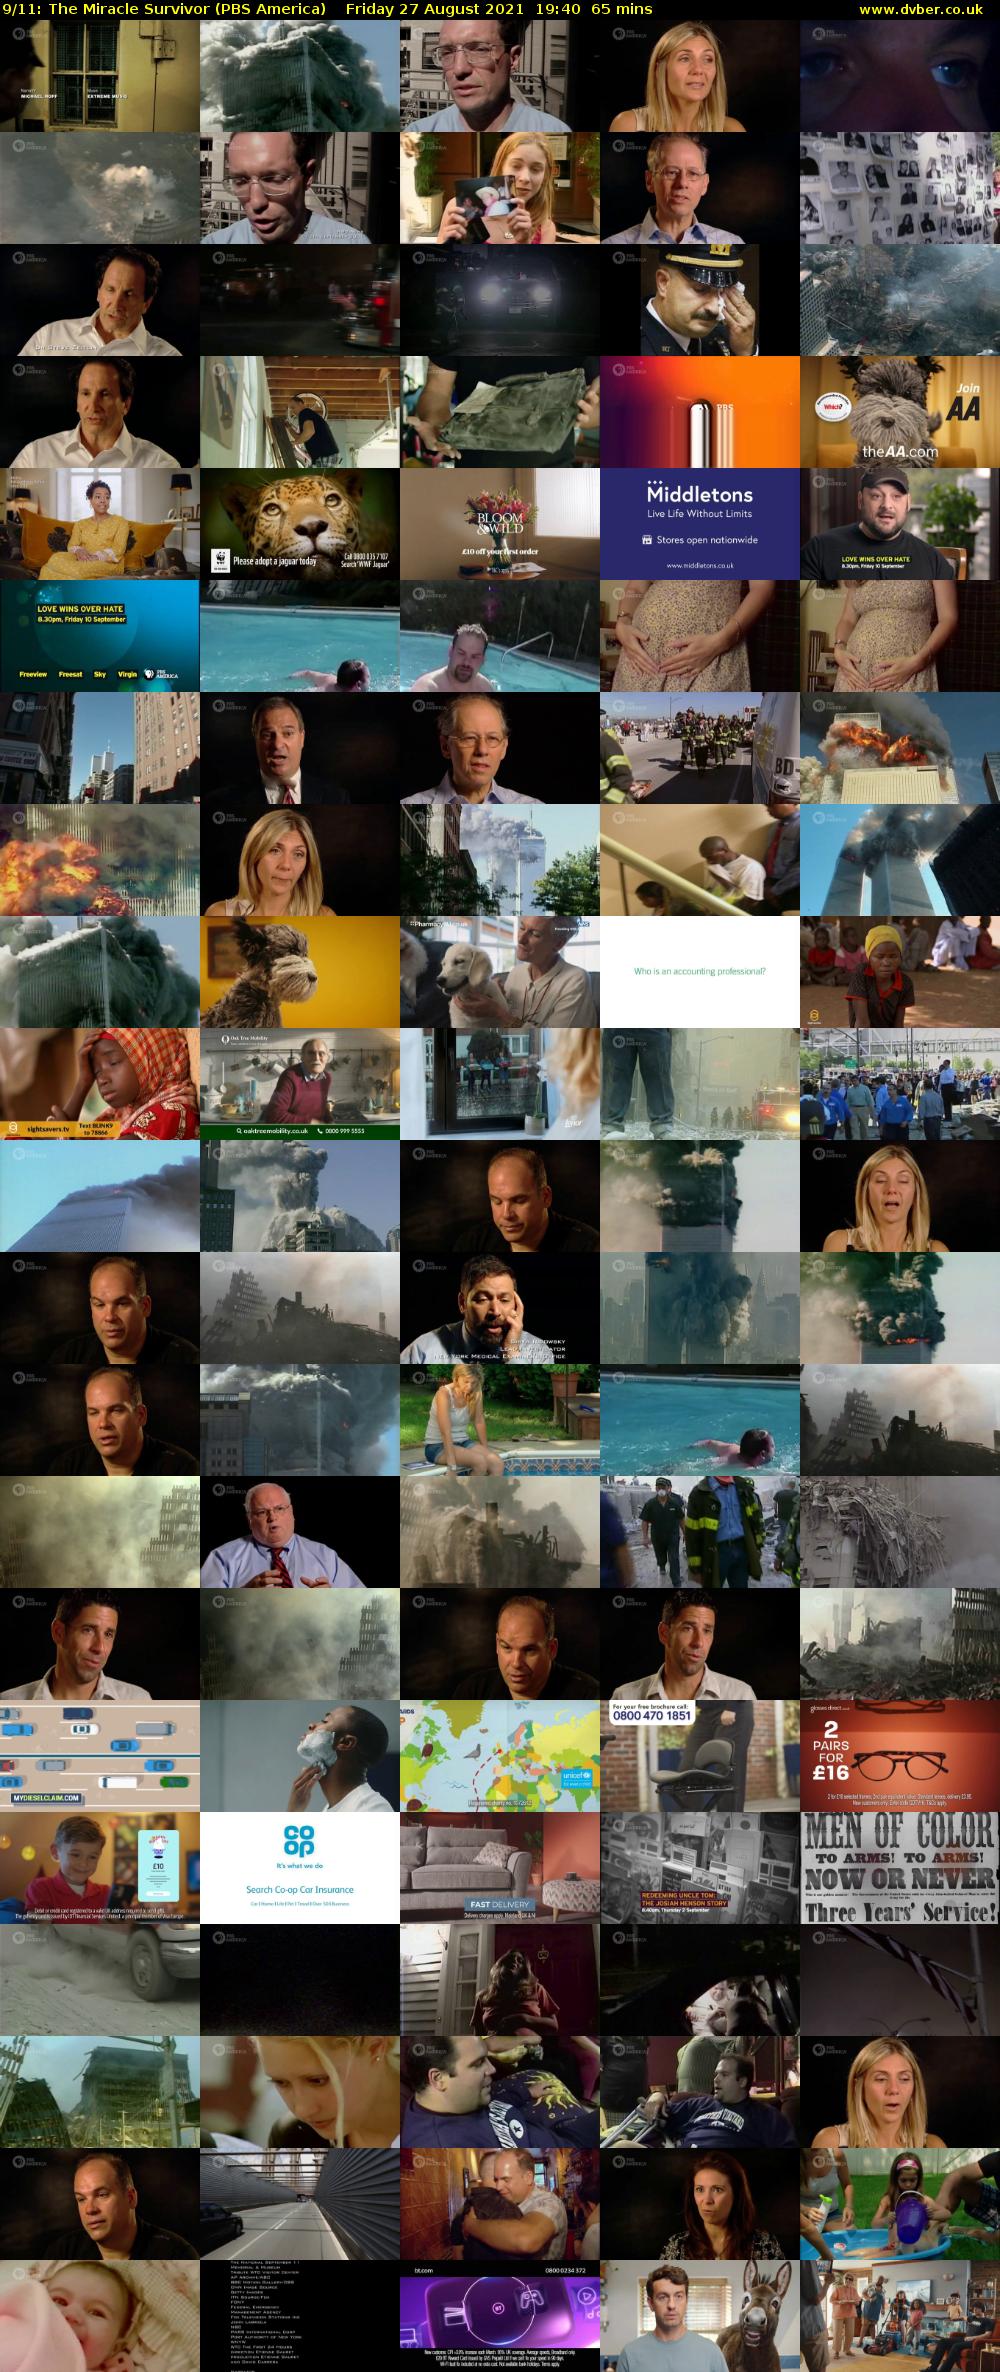 9/11: The Miracle Survivor (PBS America) Friday 27 August 2021 19:40 - 20:45